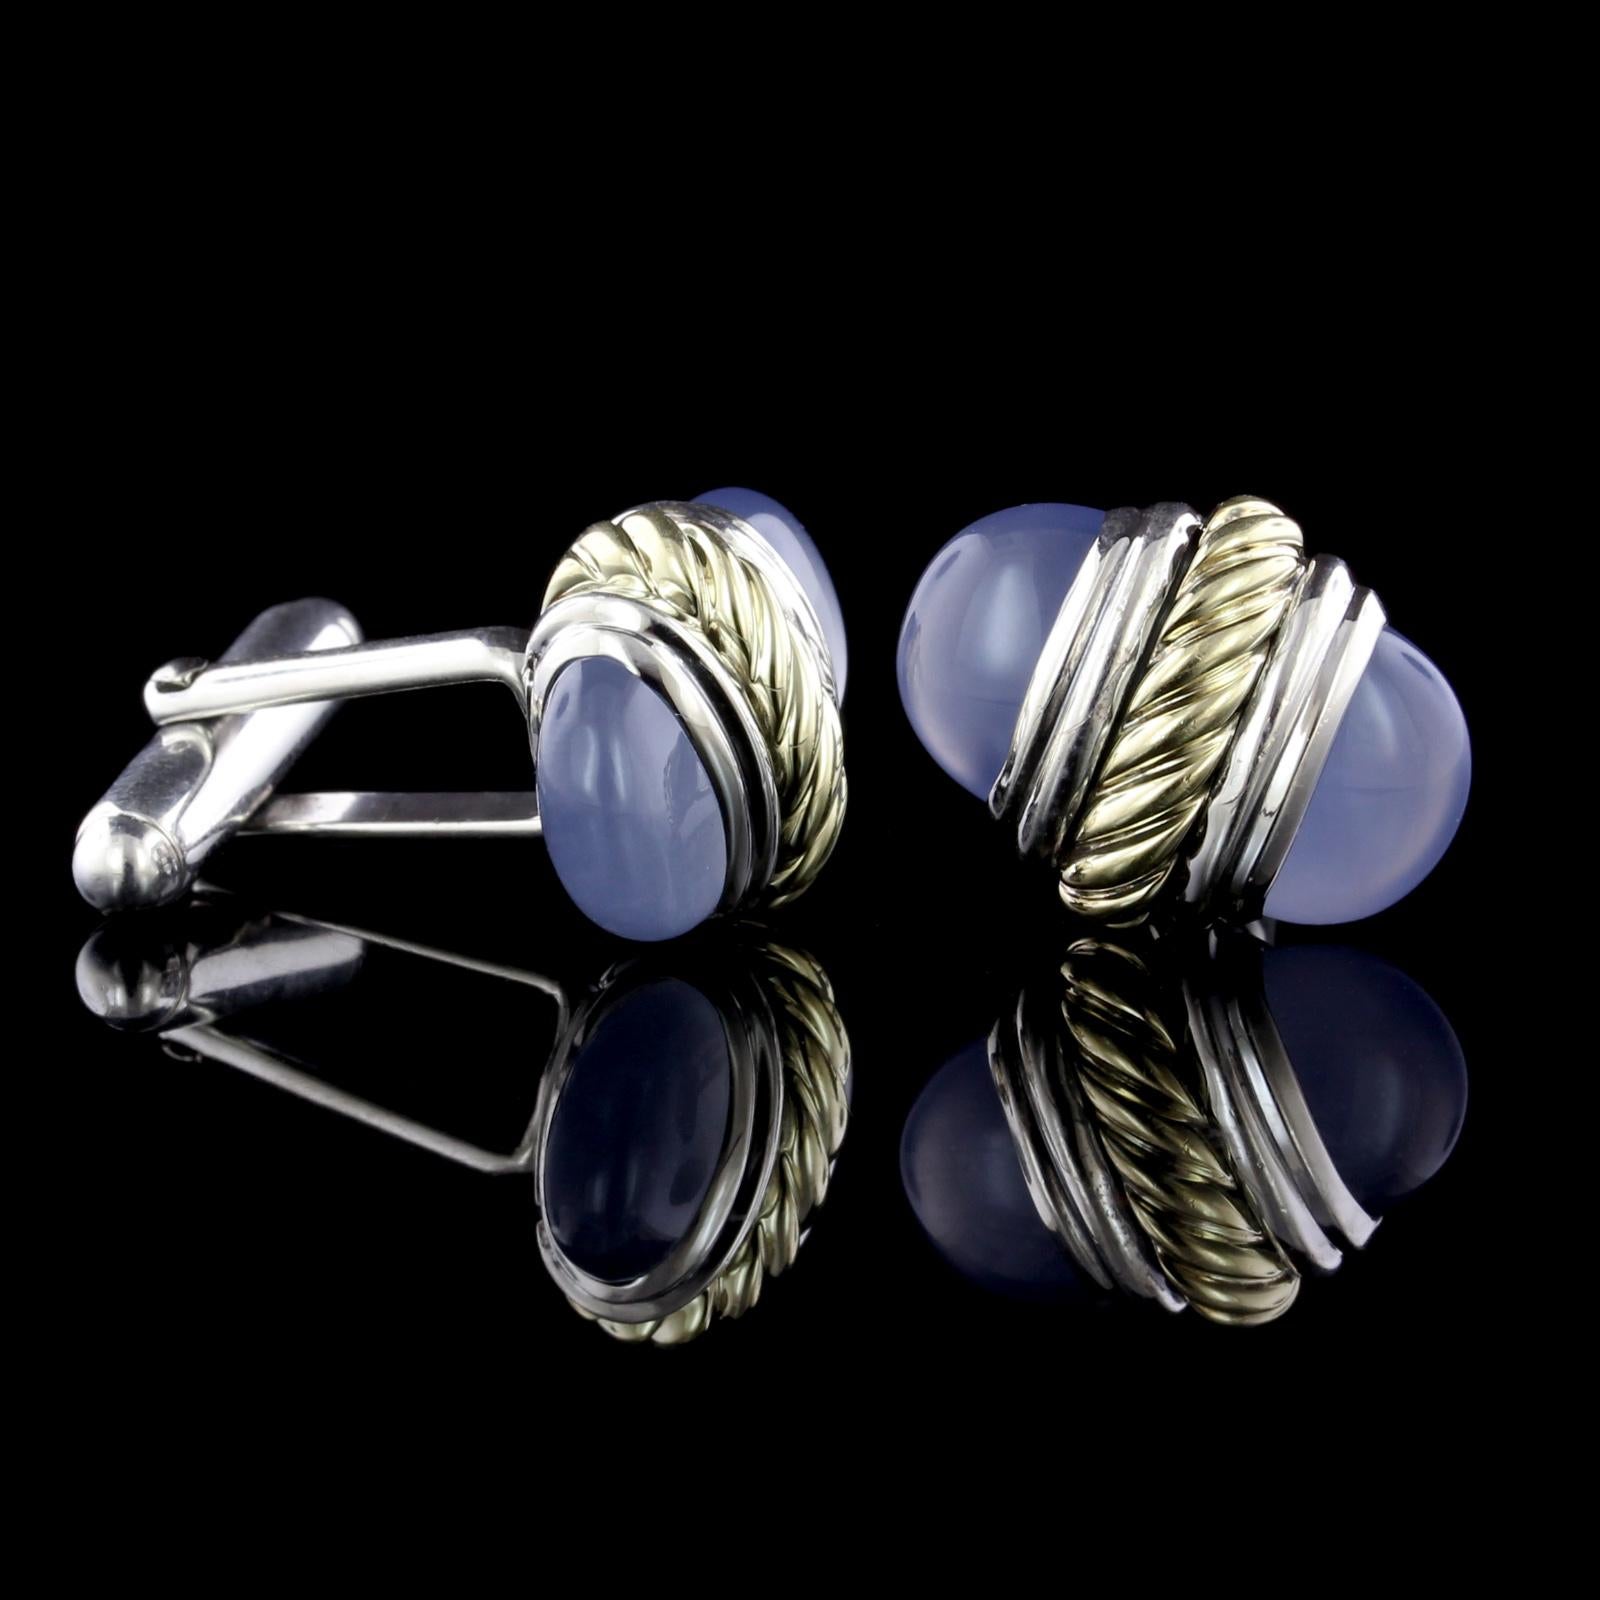 David Yurman Sterling Silver and 14K Yellow Gold Blue Chalcedony Bullet
Cufflinks. The tops measure 18.00 x 14.50mm.